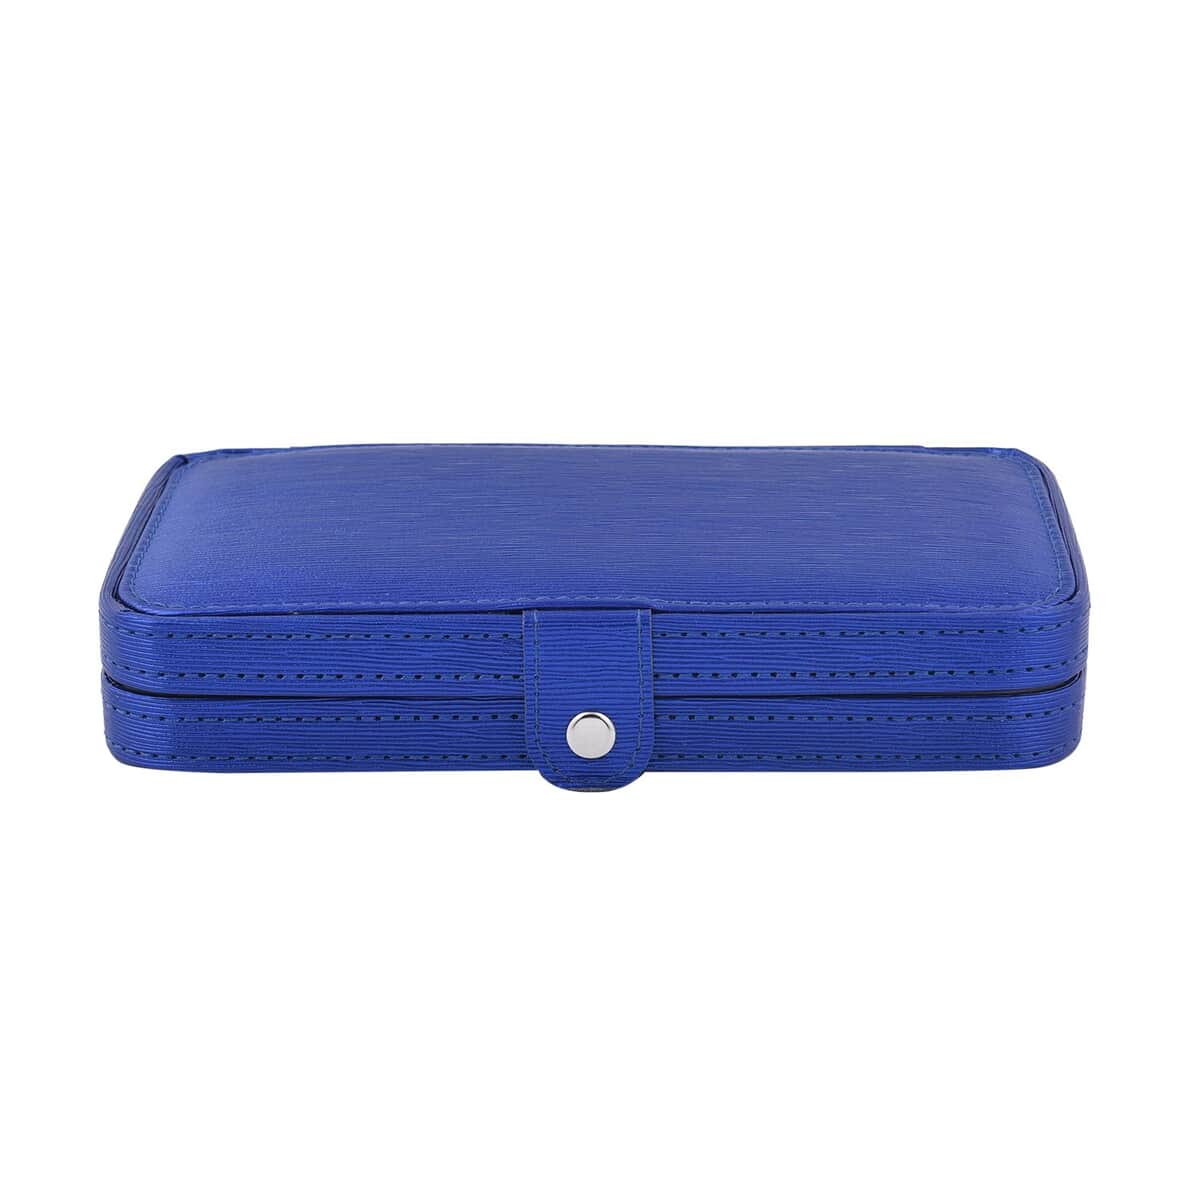 18 Pc Grooming and Cosmetic Makeup Kit in Blue Faux Leather Snap Case image number 1